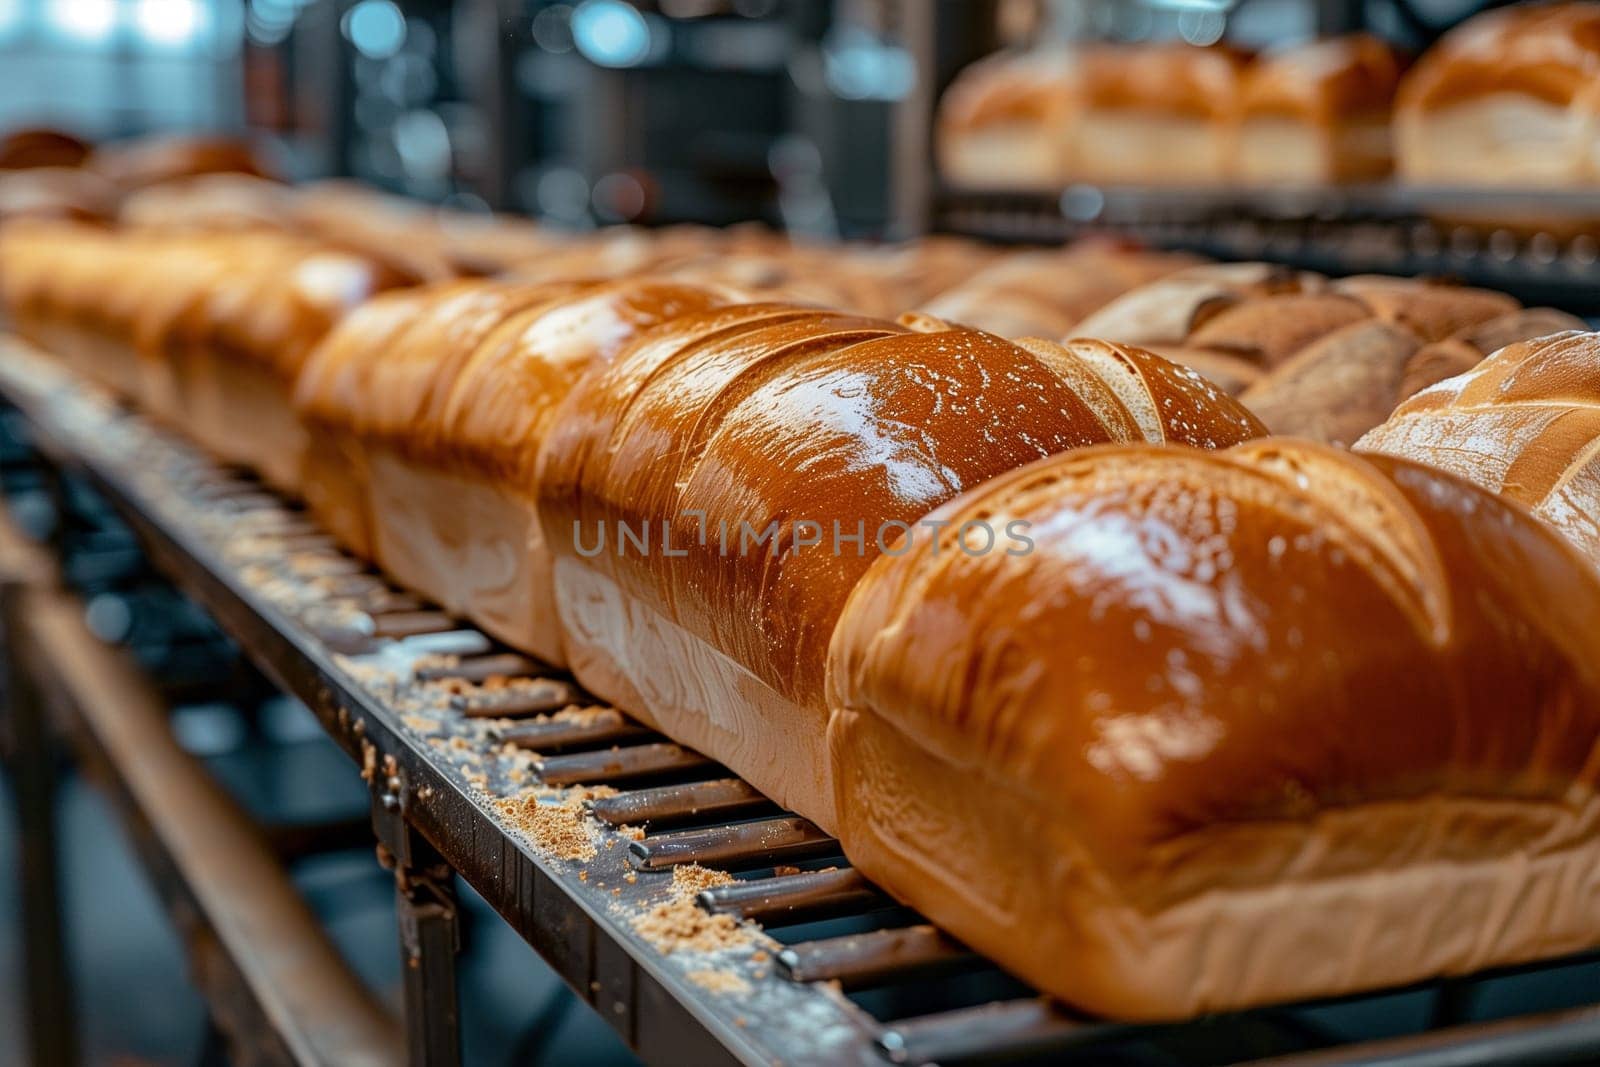 Row of Loaves of Bread on Metal Rack by Sd28DimoN_1976